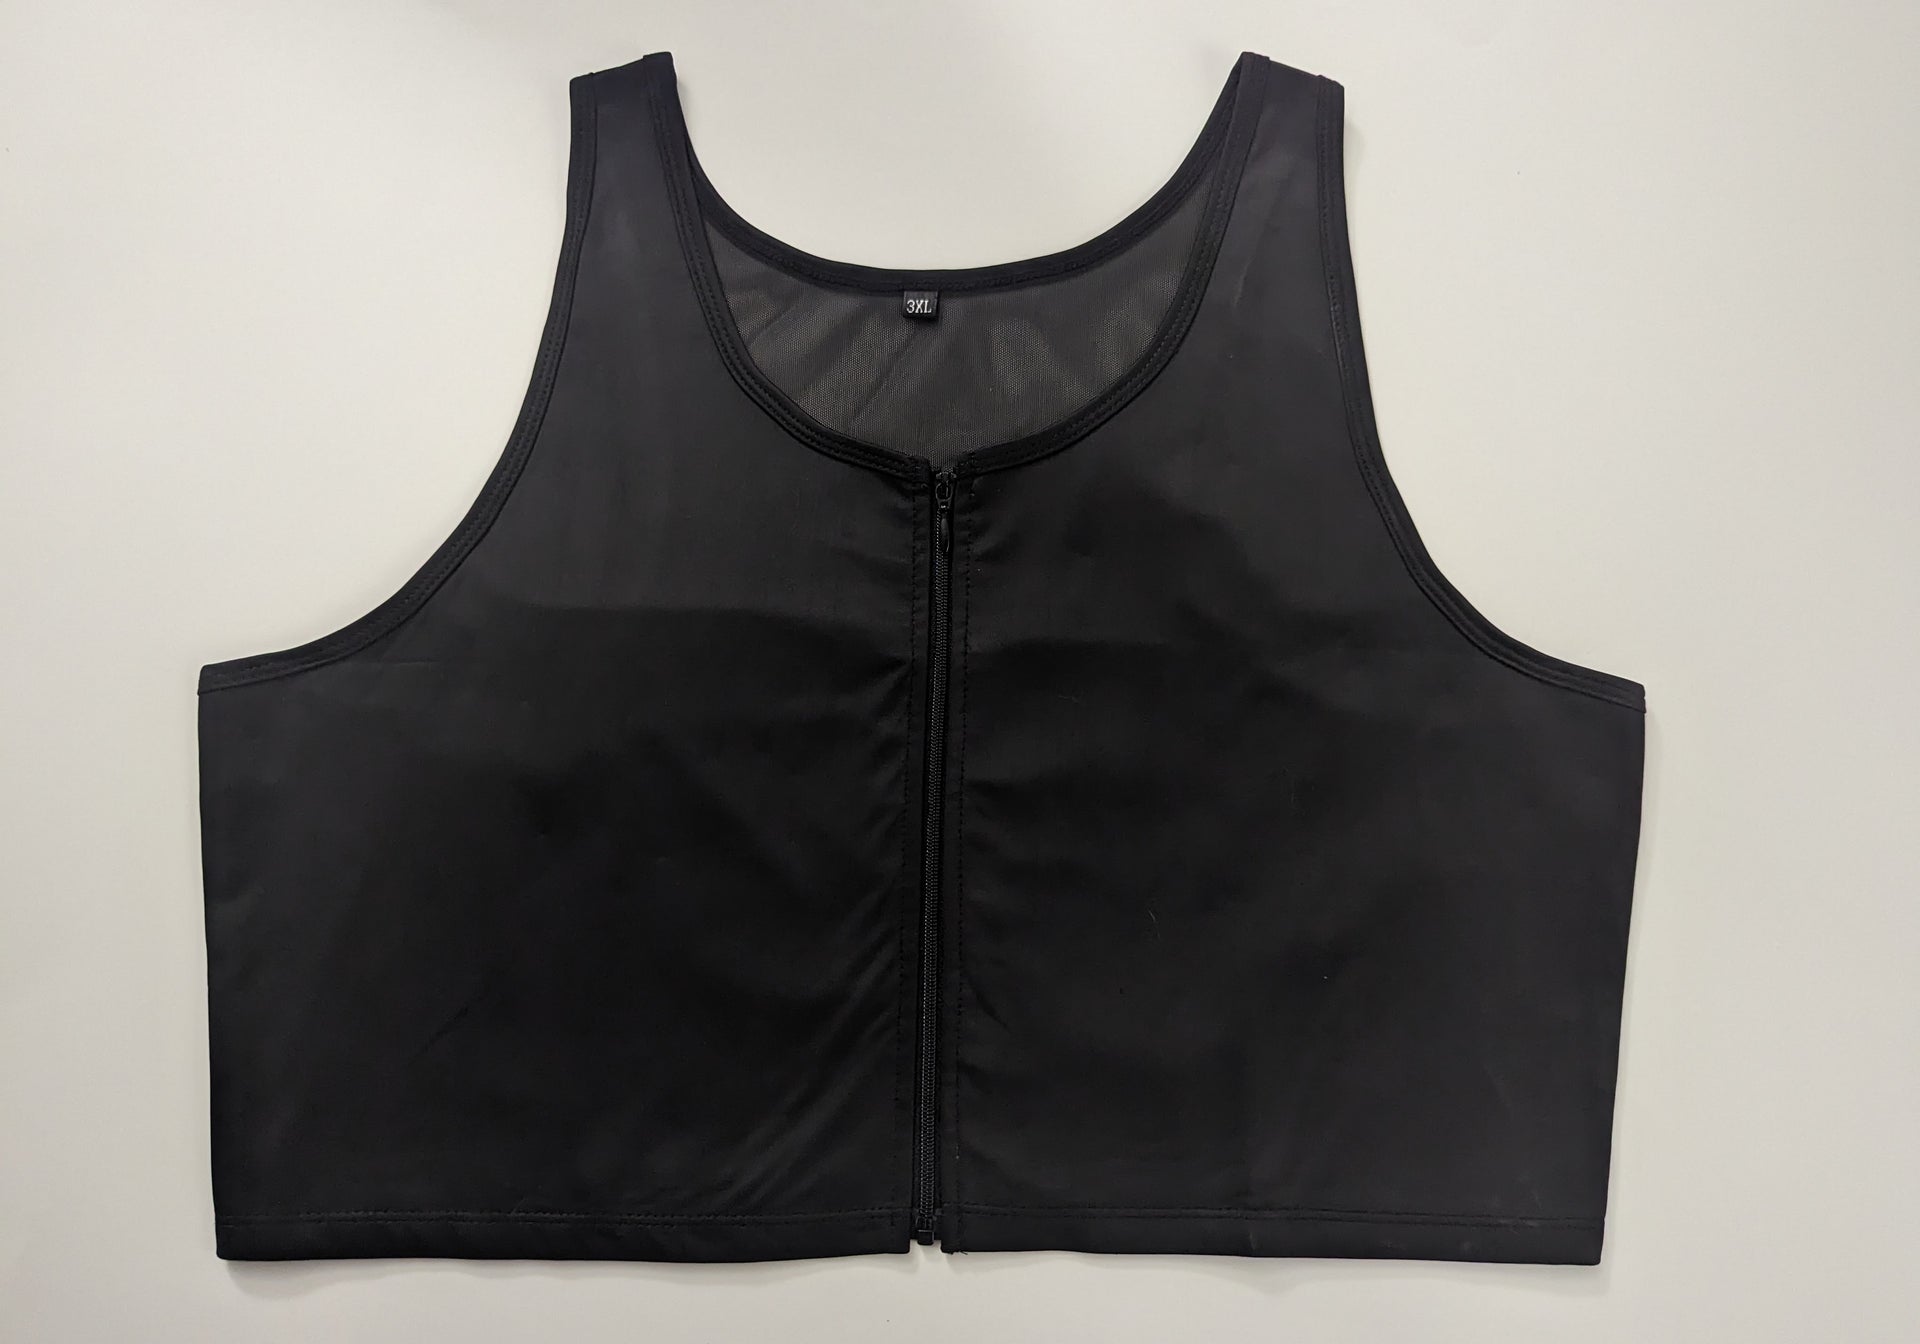 Chest Binder Reviews on Tumblr: I ordered my gc2b binder last